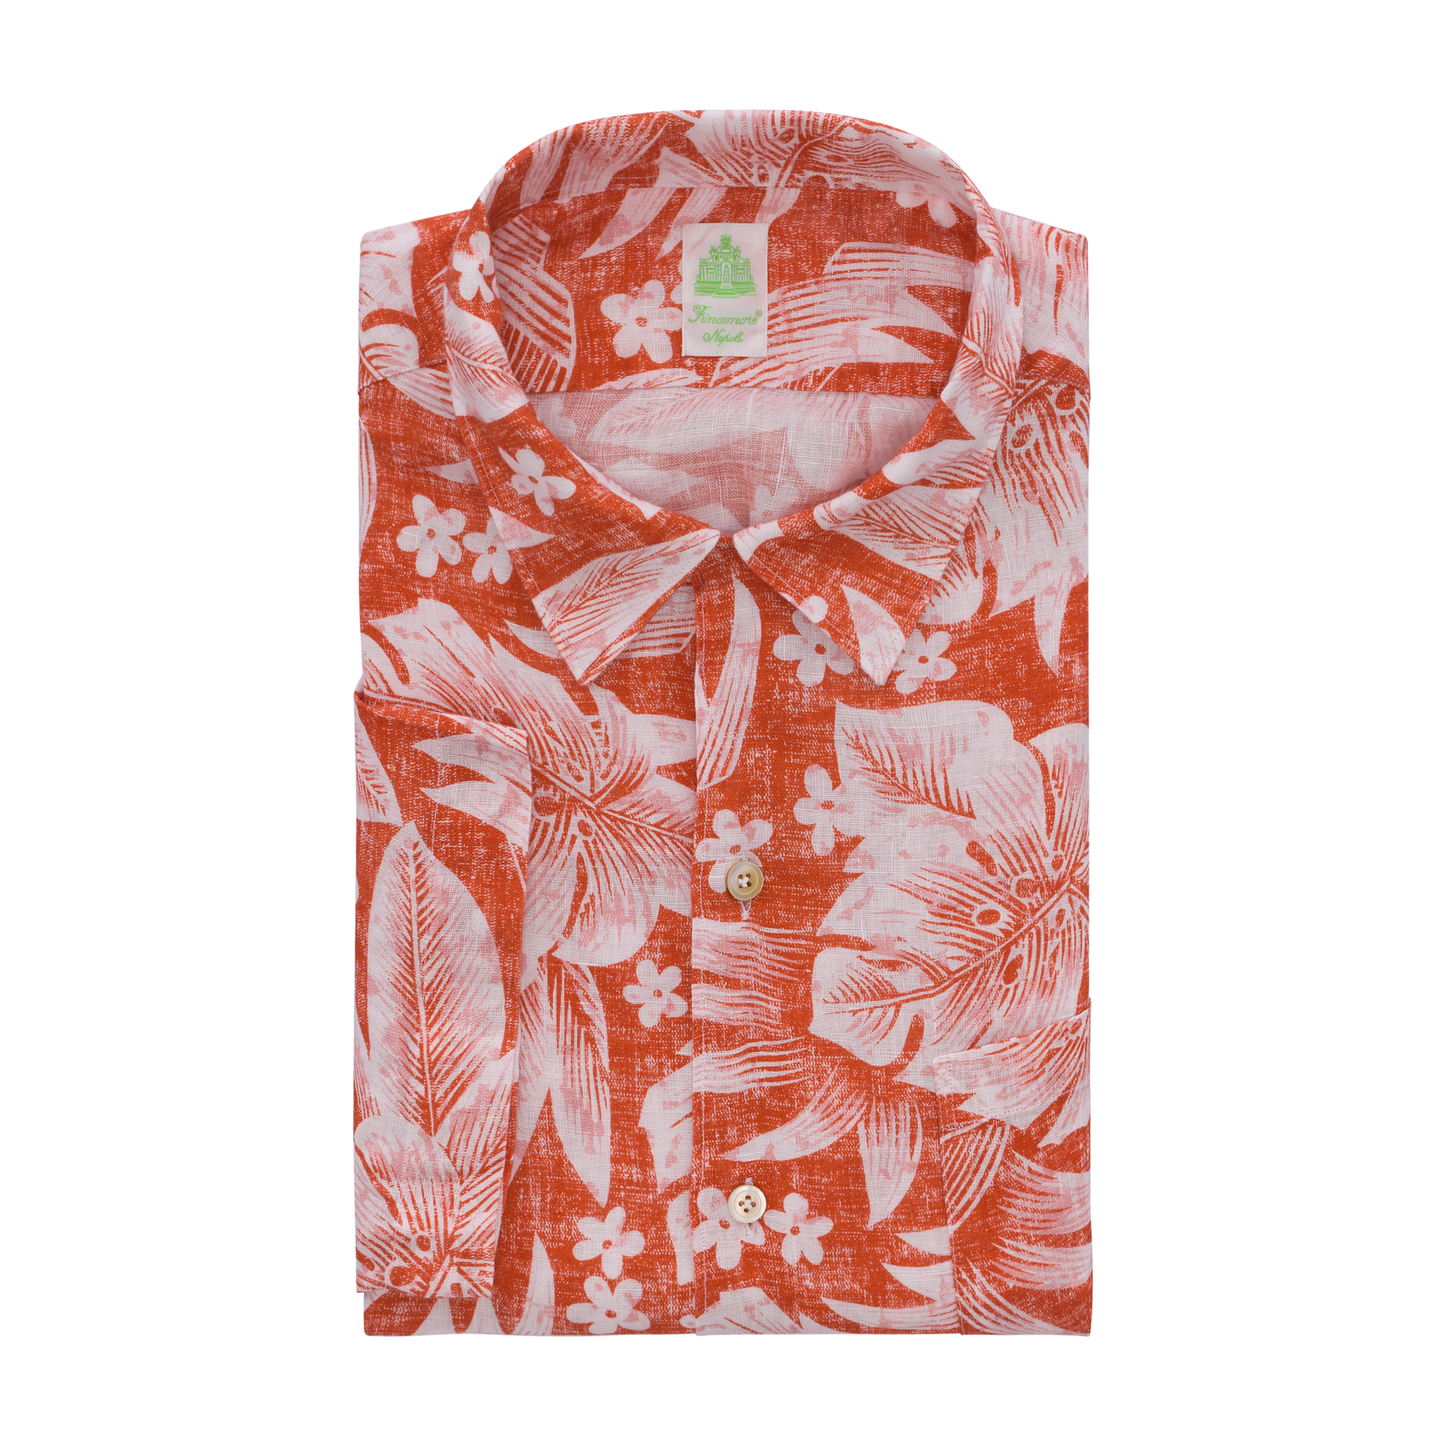 Flower Casual Bart Shirt Red Flowers Pattern